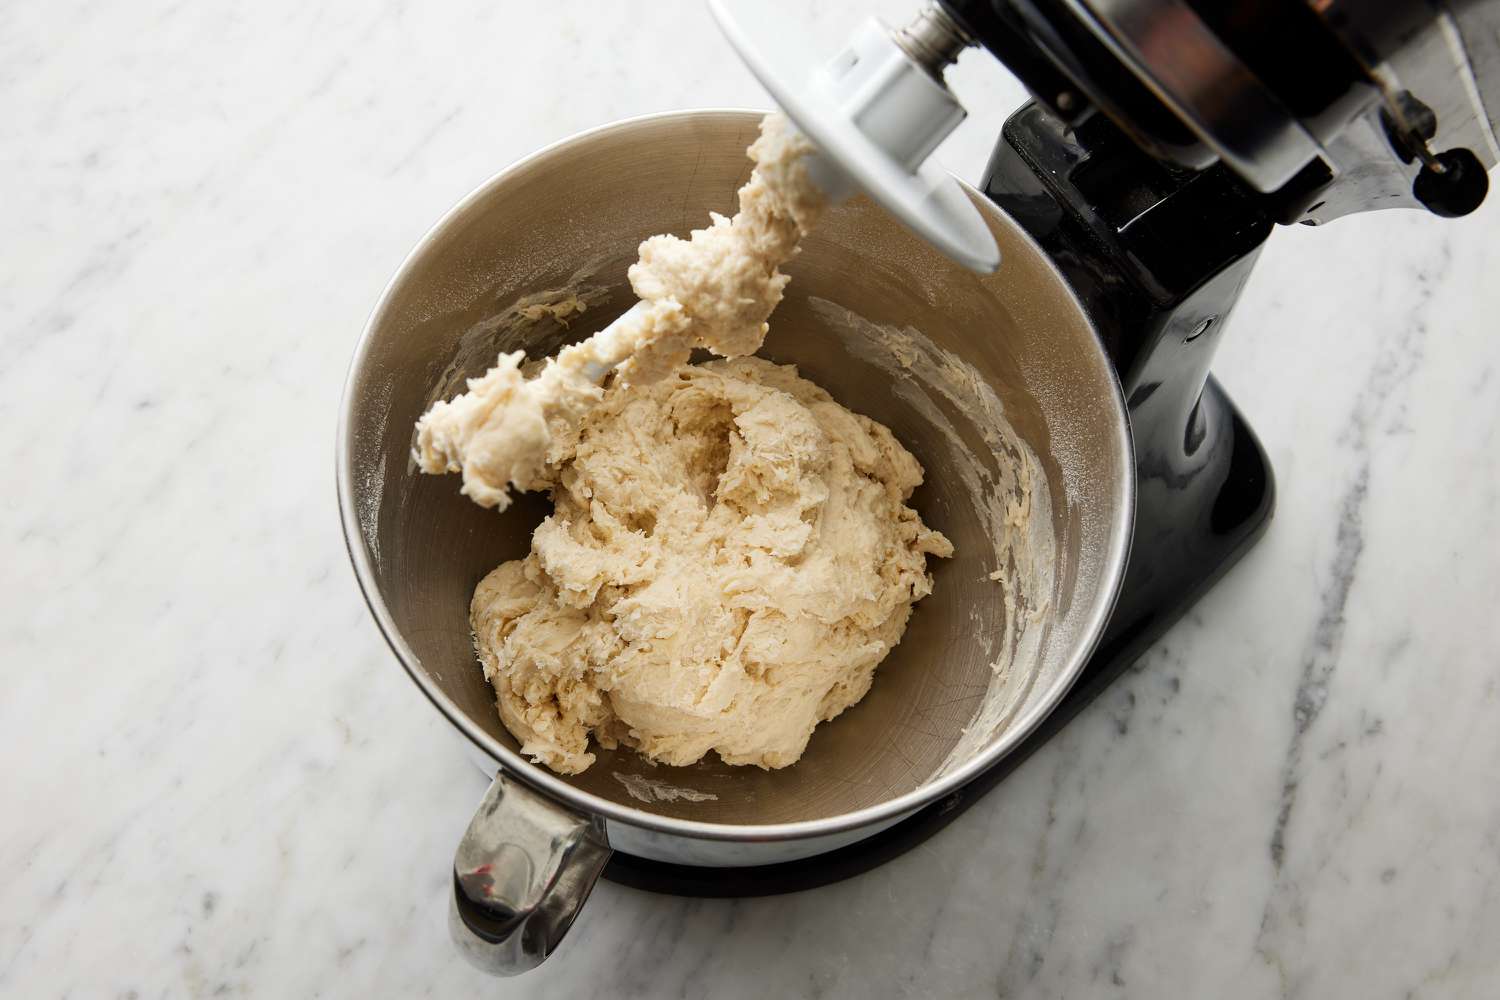 calzone dough blended in stand mixer with dough hook